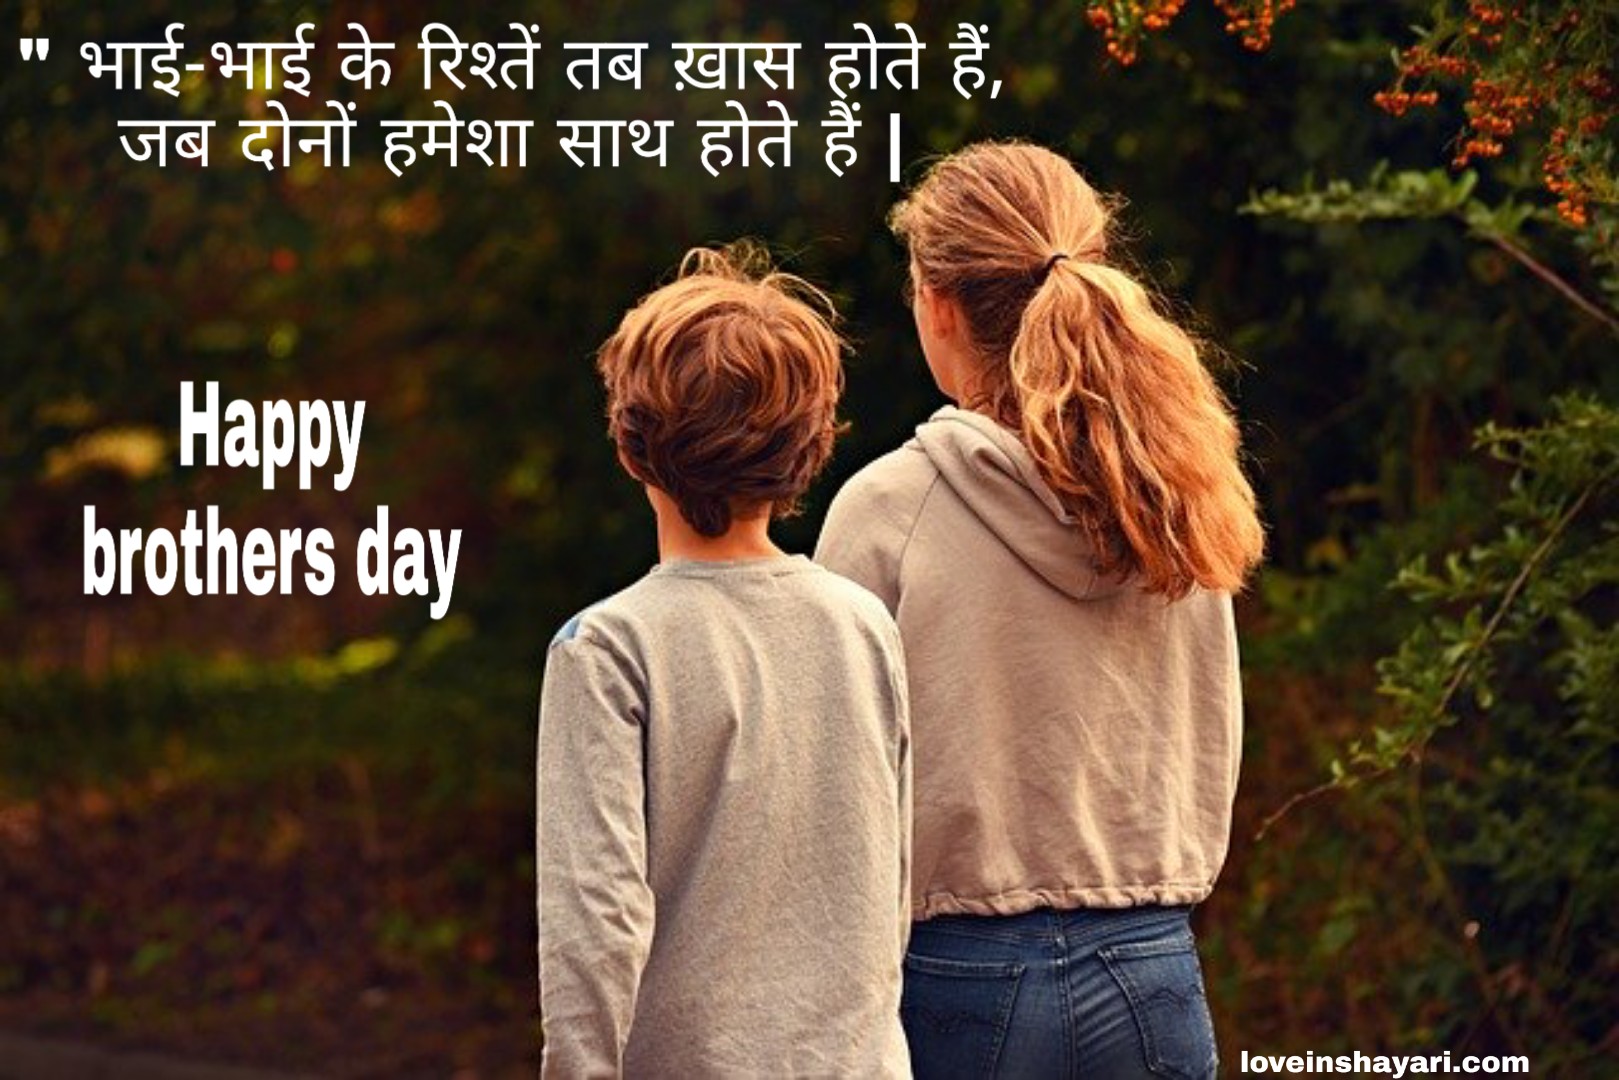 Happy brothers day images 2020 hd » Love In Shayari